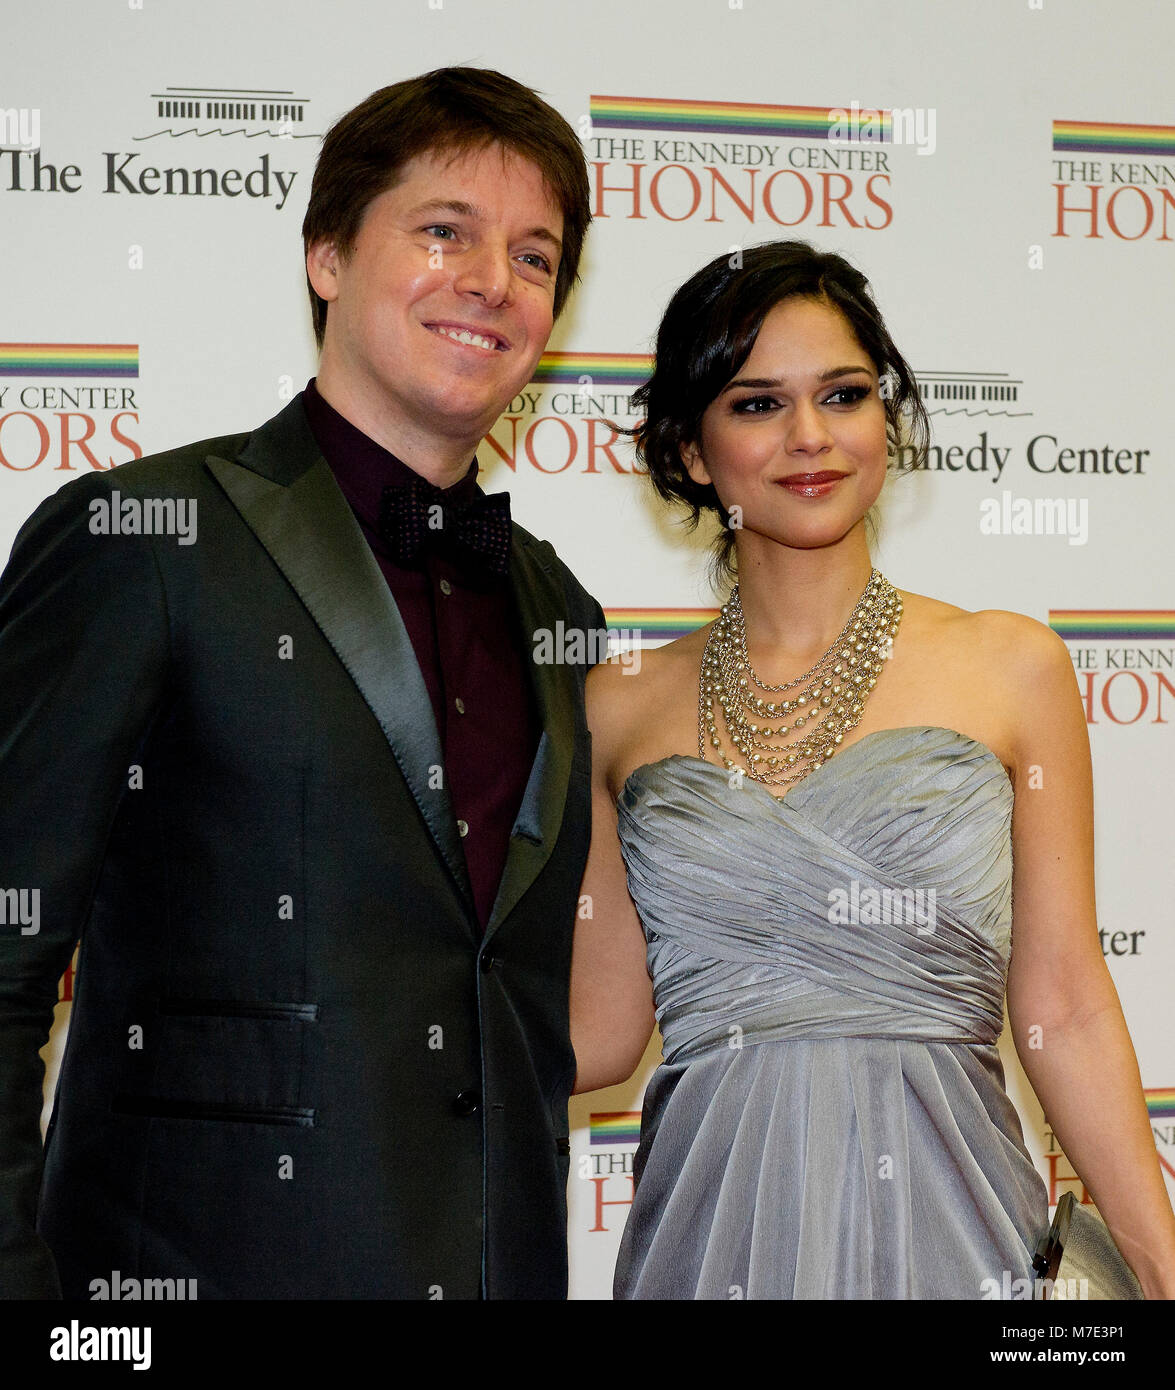 Joshua Bell and Larisa Martinez arrive for the formal Artist's Dinner honoring the recipients of the 2012 Kennedy Center Honors hosted by United States Secretary of State Hillary Rodham Clinton at the U.S. Department of State in Washington, D.C. on Saturday, December 1, 2012. The 2012 honorees are Buddy Guy, actor Dustin Hoffman, late-night host David Letterman, dancer Natalia Makarova, and the British rock band Led Zeppelin (Robert Plant, Jimmy Page, and John Paul Jones). Credit: Ron Sachs / CNP /MediaPunch Stock Photo